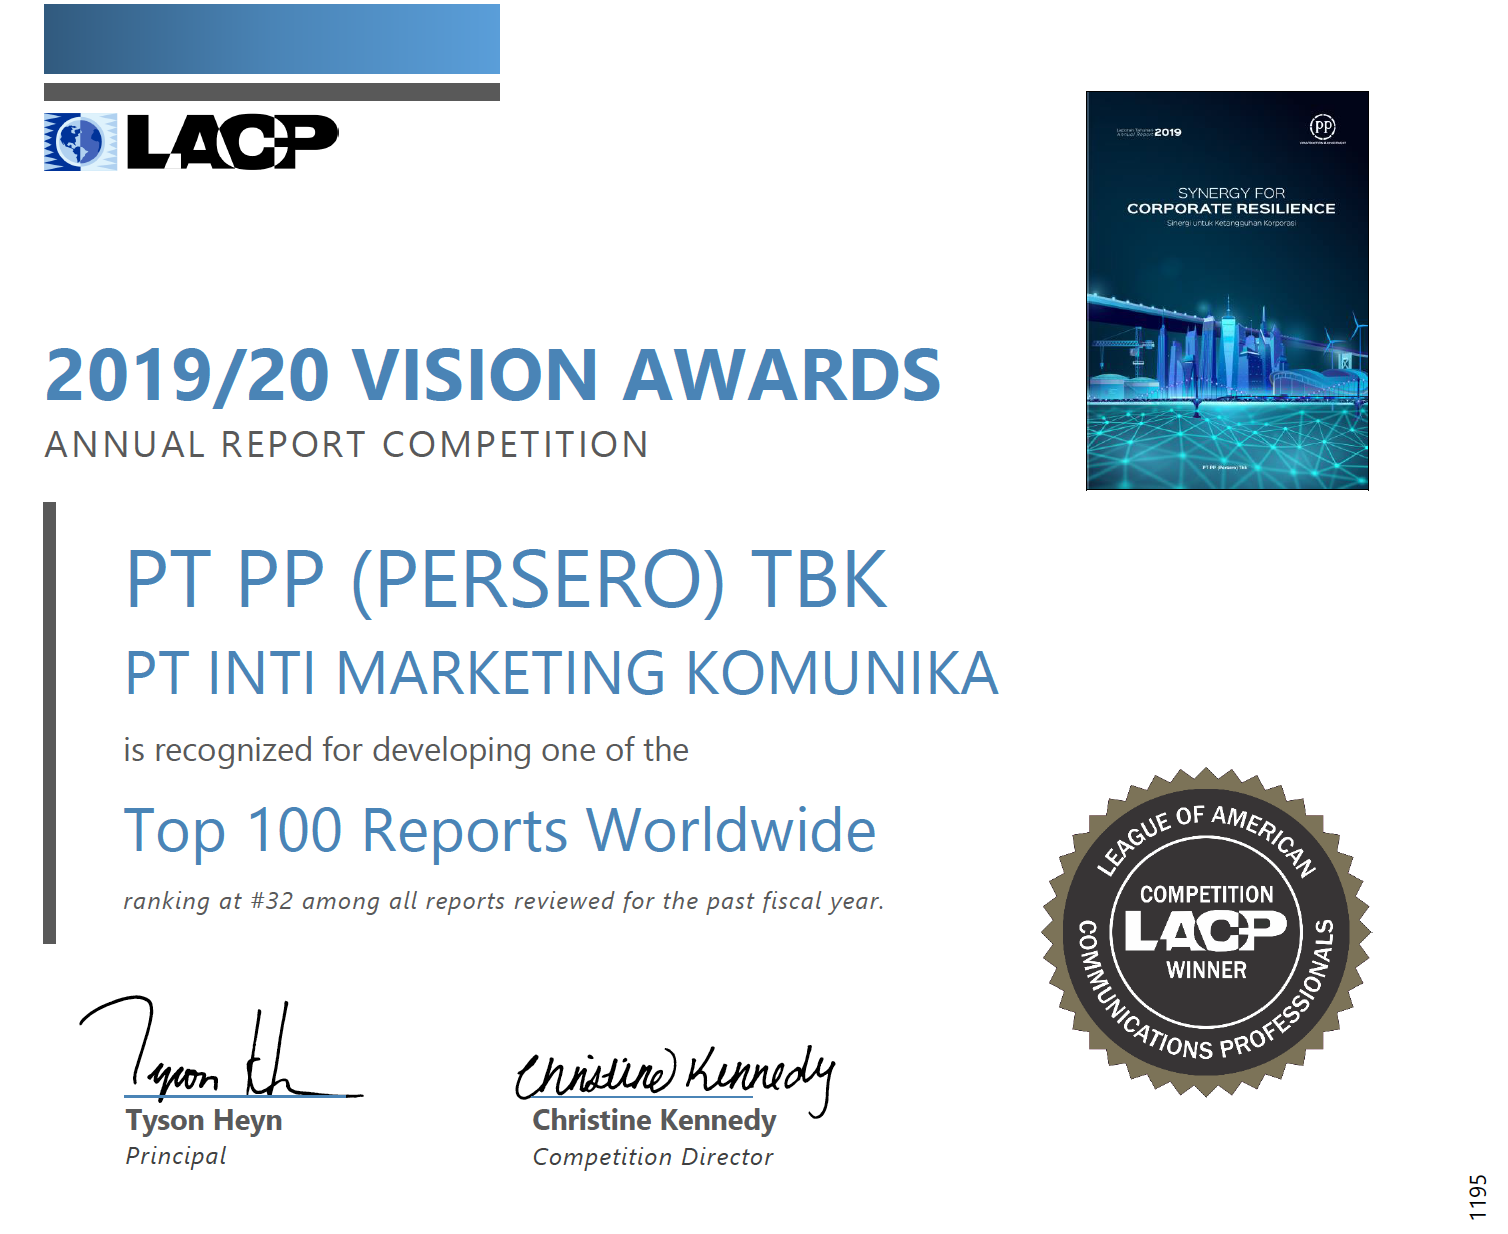 LACP COMPETITION WINNER (TOP 100 REPORTS WORLDWIDE)